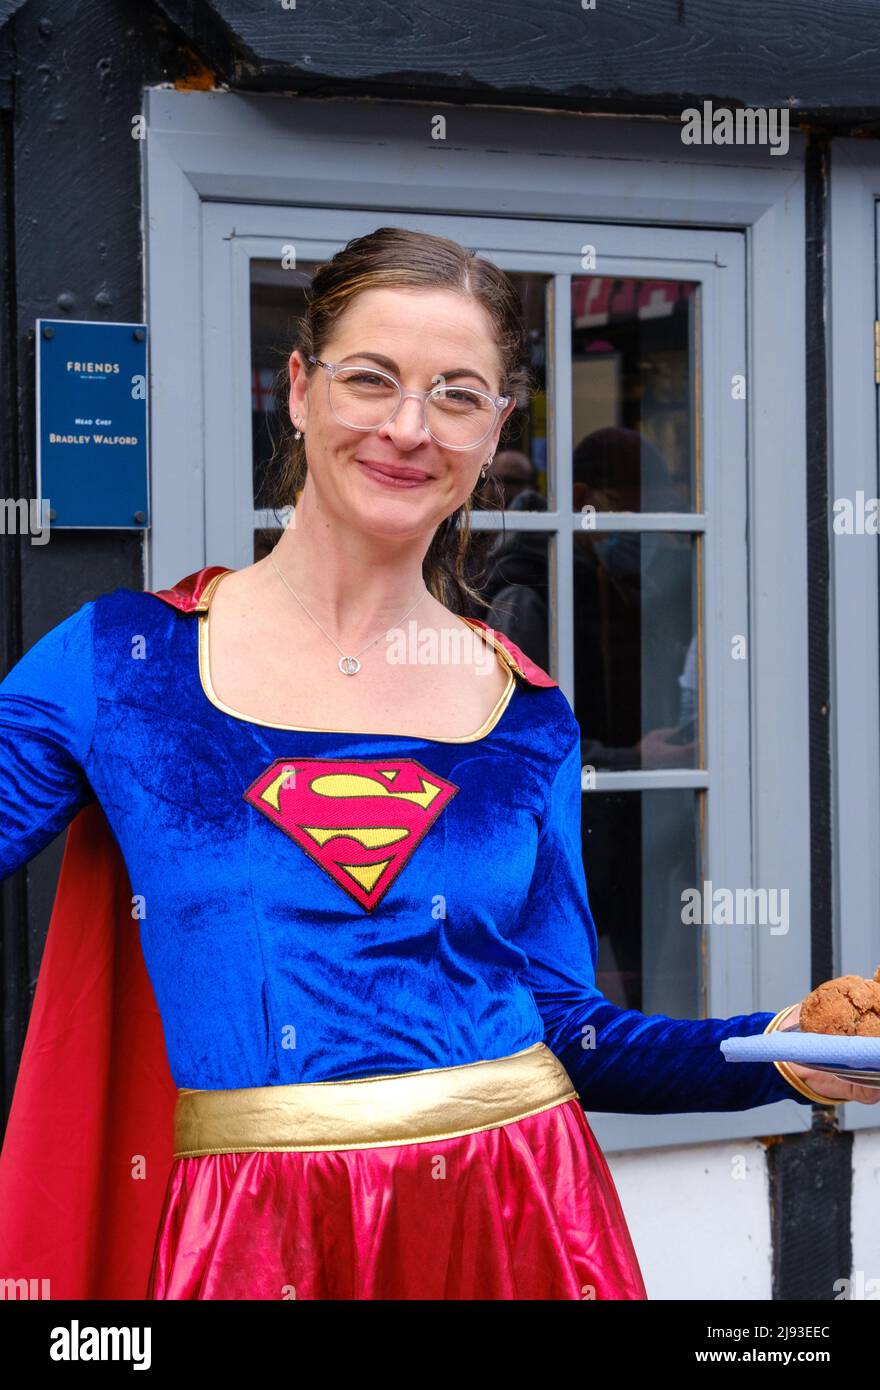 Staff member from Friends Restaurant dressed in Superwoman fancy dress smiles & holds tray of food at 2022 St George’s Day Celebration, Pinner, London Stock Photo